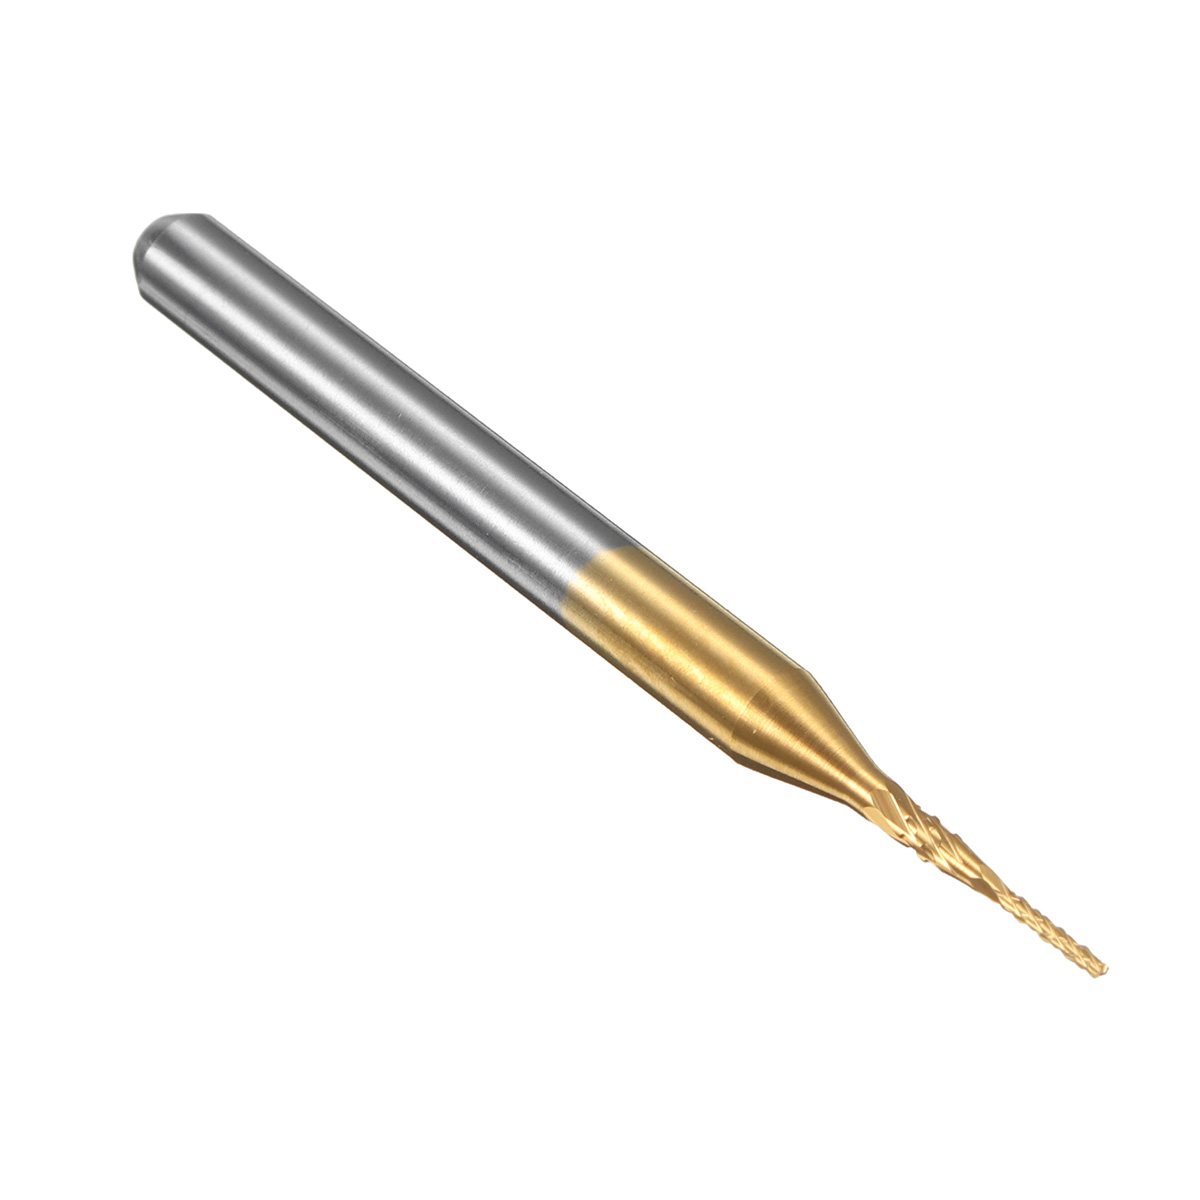 Drillpro-10pcs-08mm-Titanium-Coated-Engraving-Milling-Cutter-Carbide-End-Mill-Rotary-Burr-1531799-8